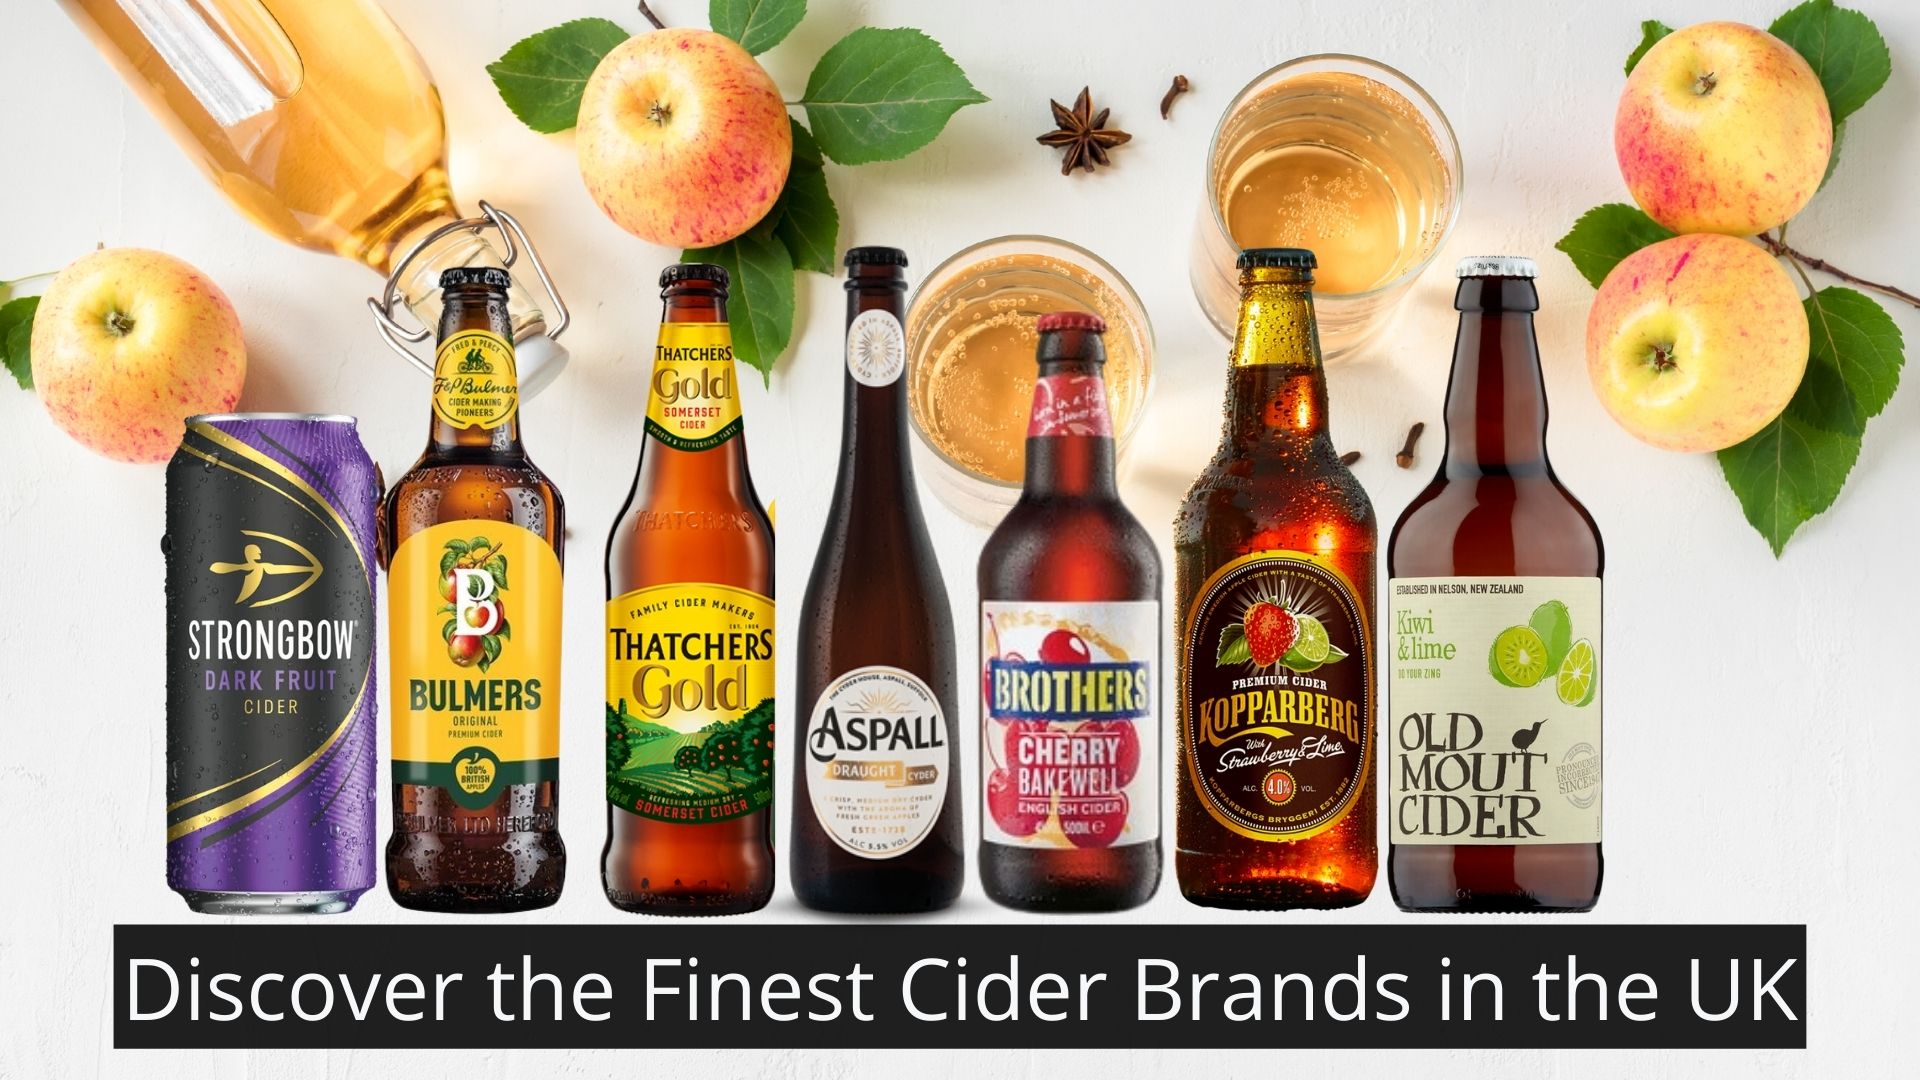 Discover the Finest Cider Brands in the UK